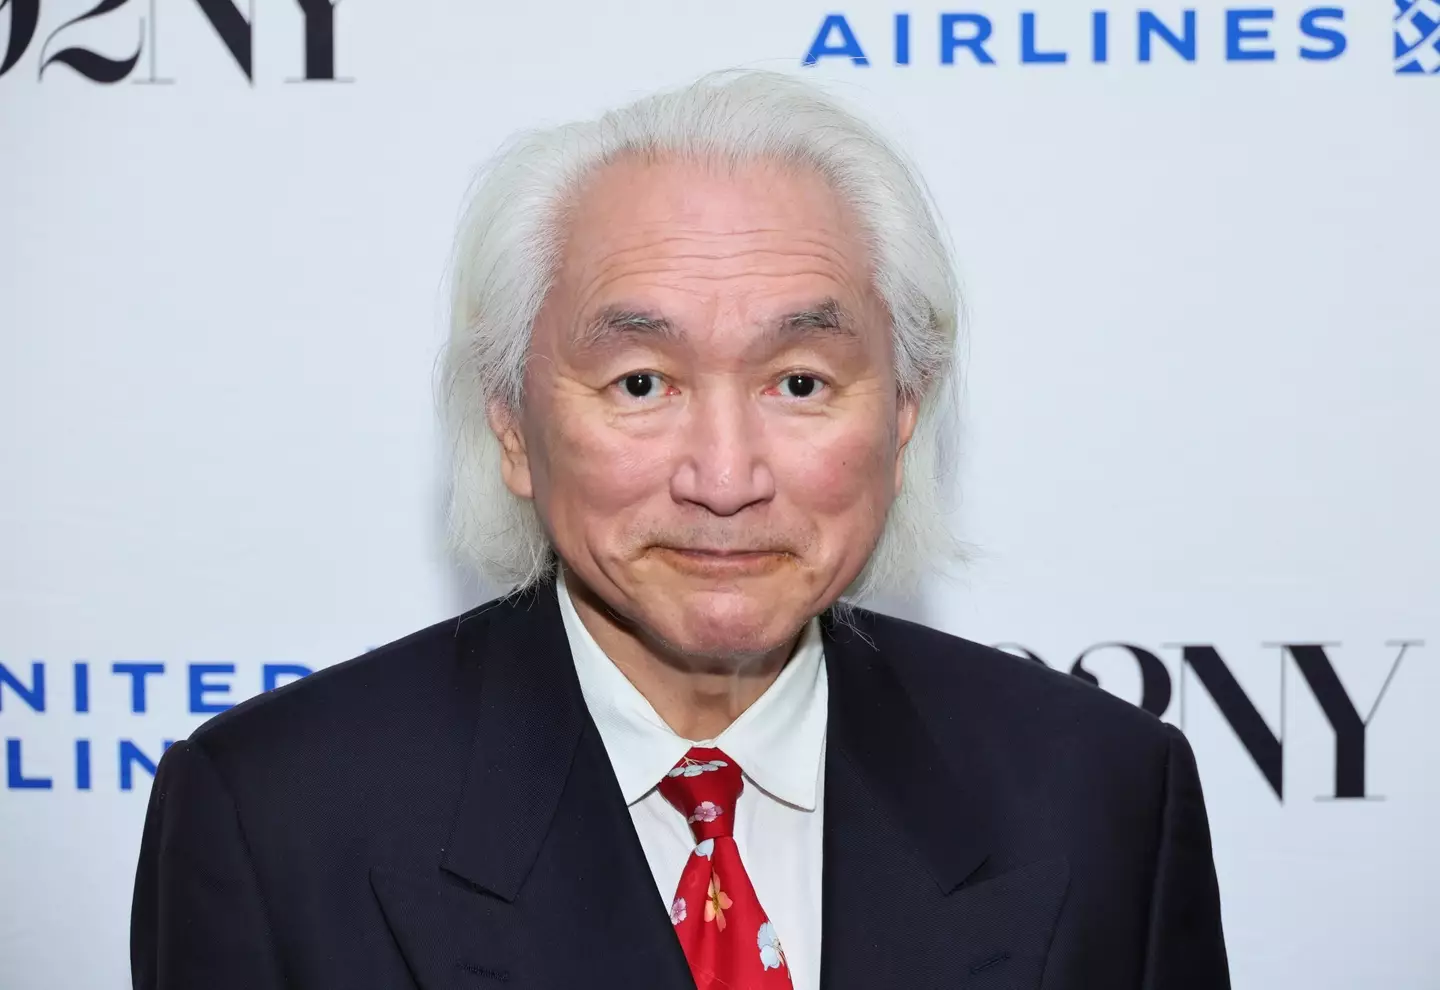 Theoretical physicist Michio Kaku said fears about AI were misguided and the technology was a 'glorified tape recorder'.